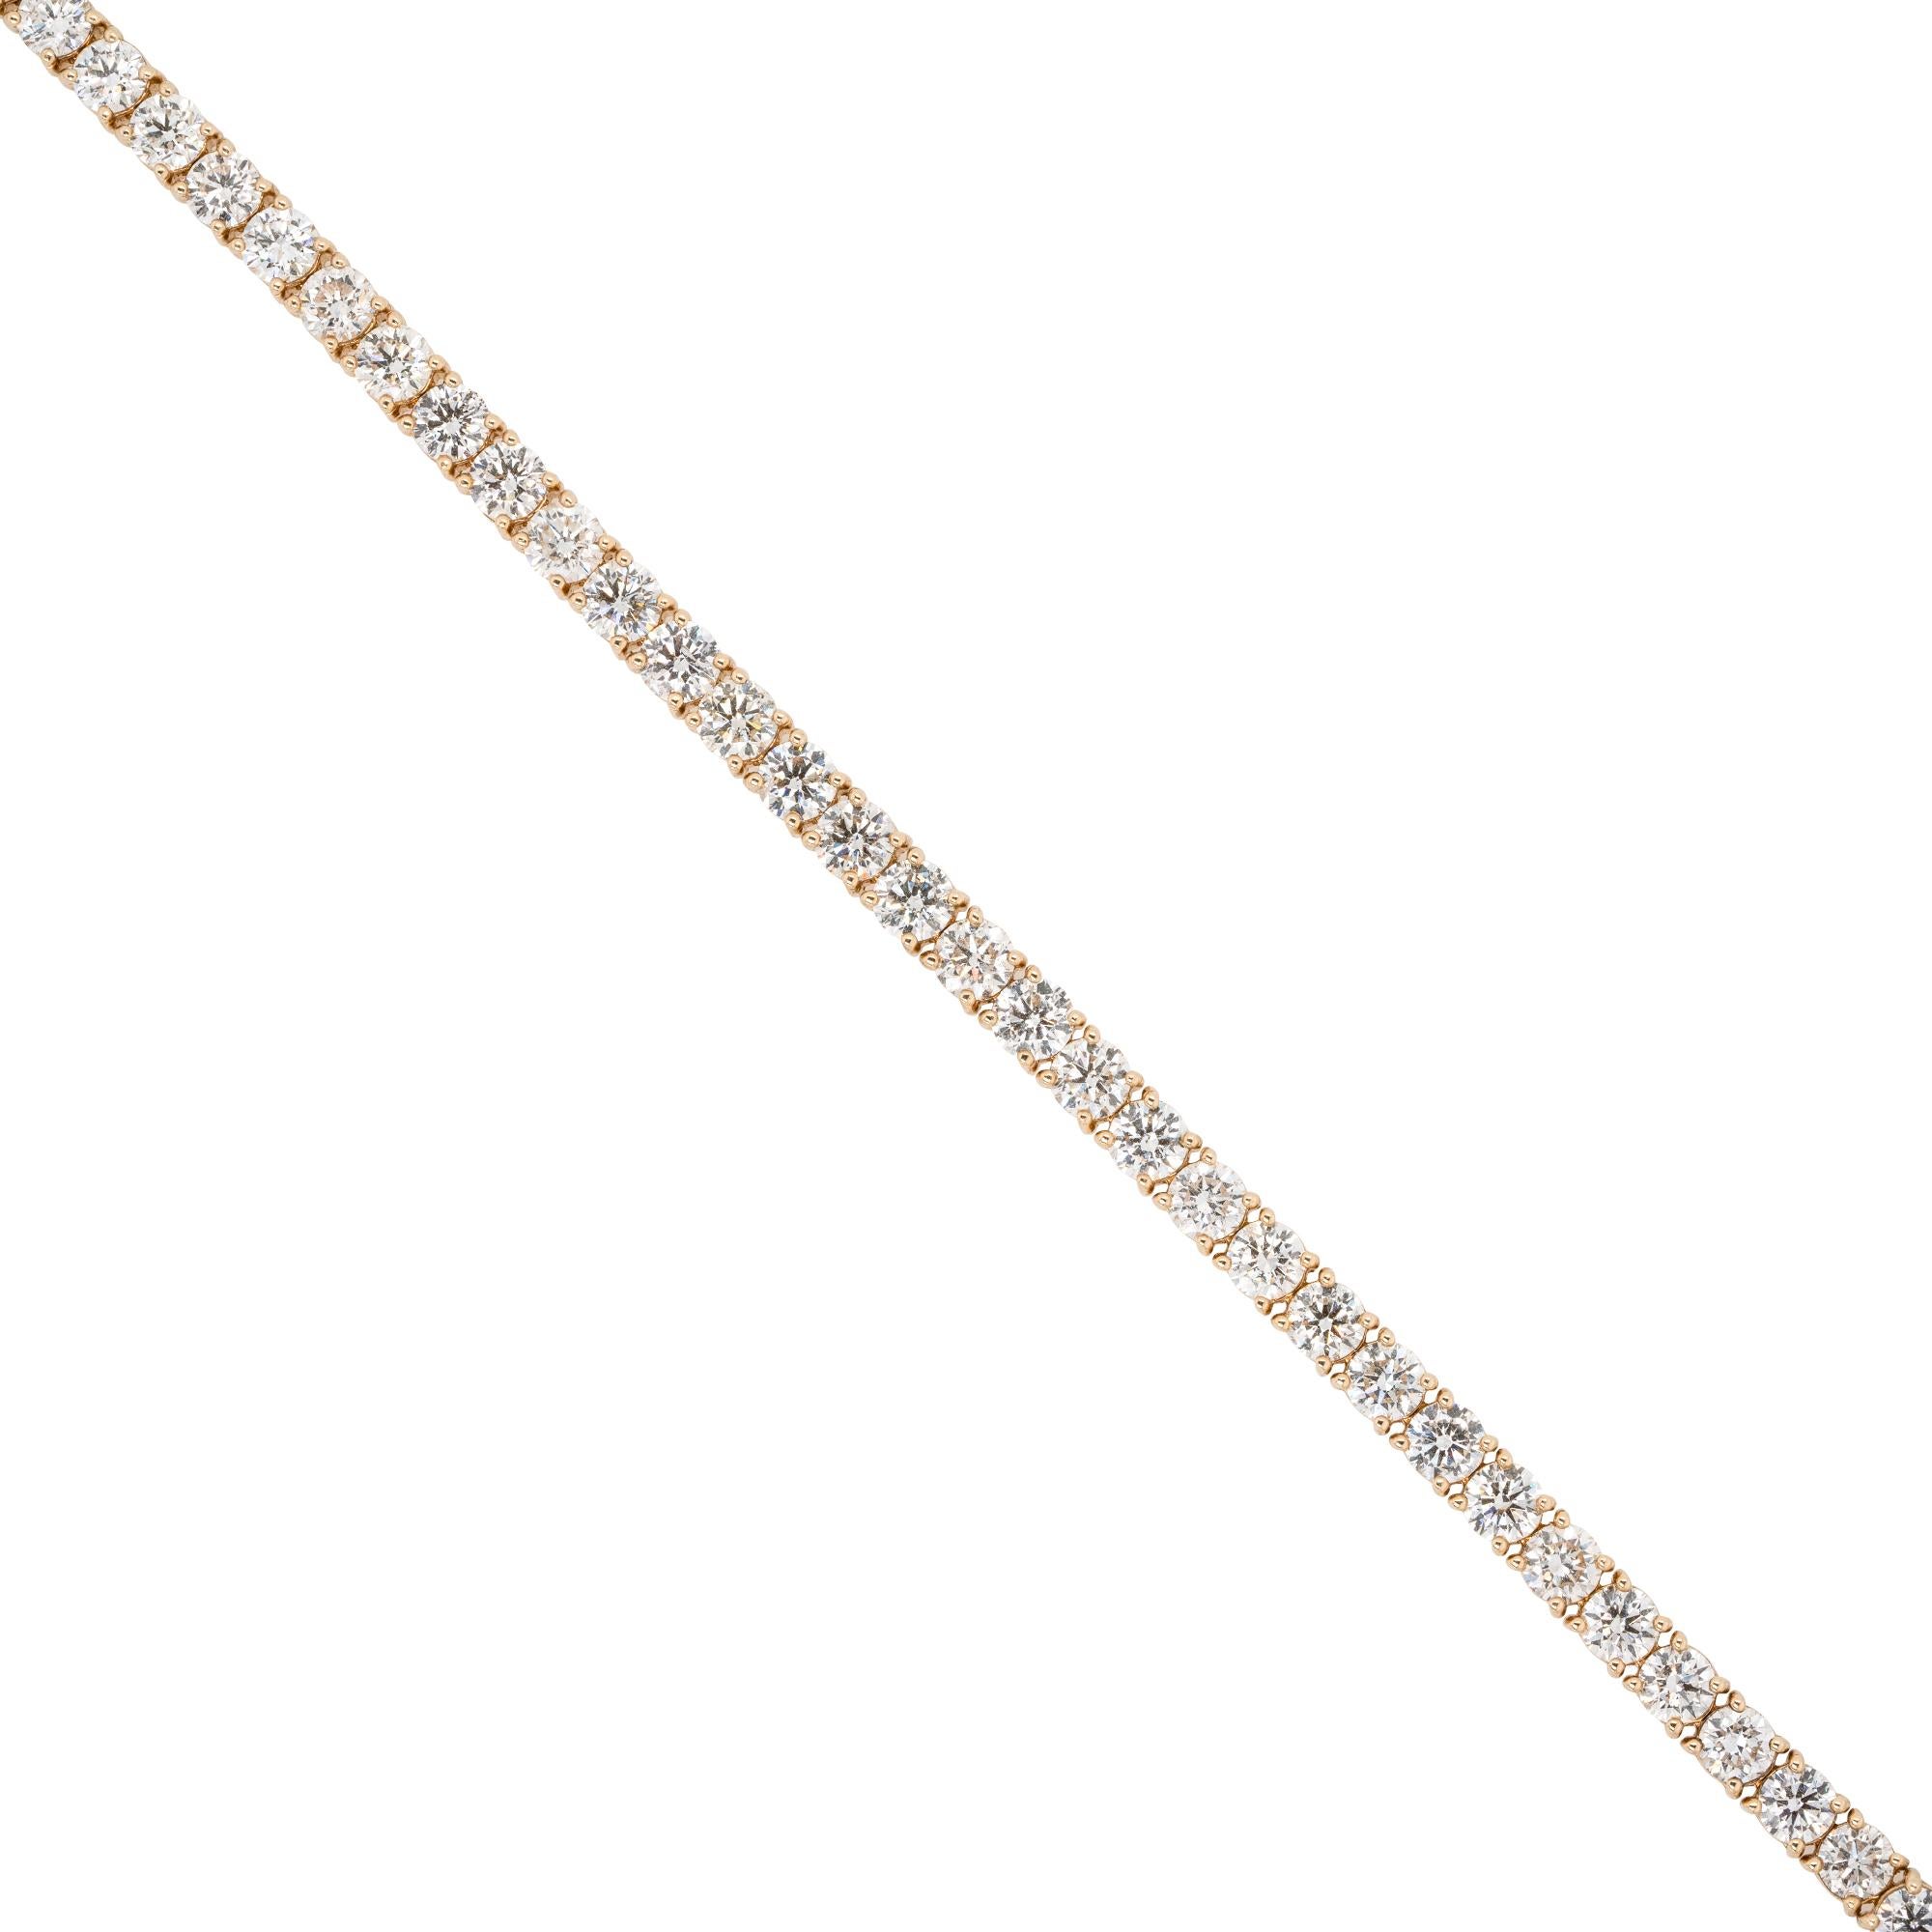 Material: 14k yellow gold
Diamond Details: Approx. 13.03ctw of round cut Diamonds. Diamonds are G/H in color and VS in clarity
Bracelet Measurements: 7 inches in length and 4.5mm  wide
Total Weight: 14.3g (9.2dwt)
Additional Details: This item comes